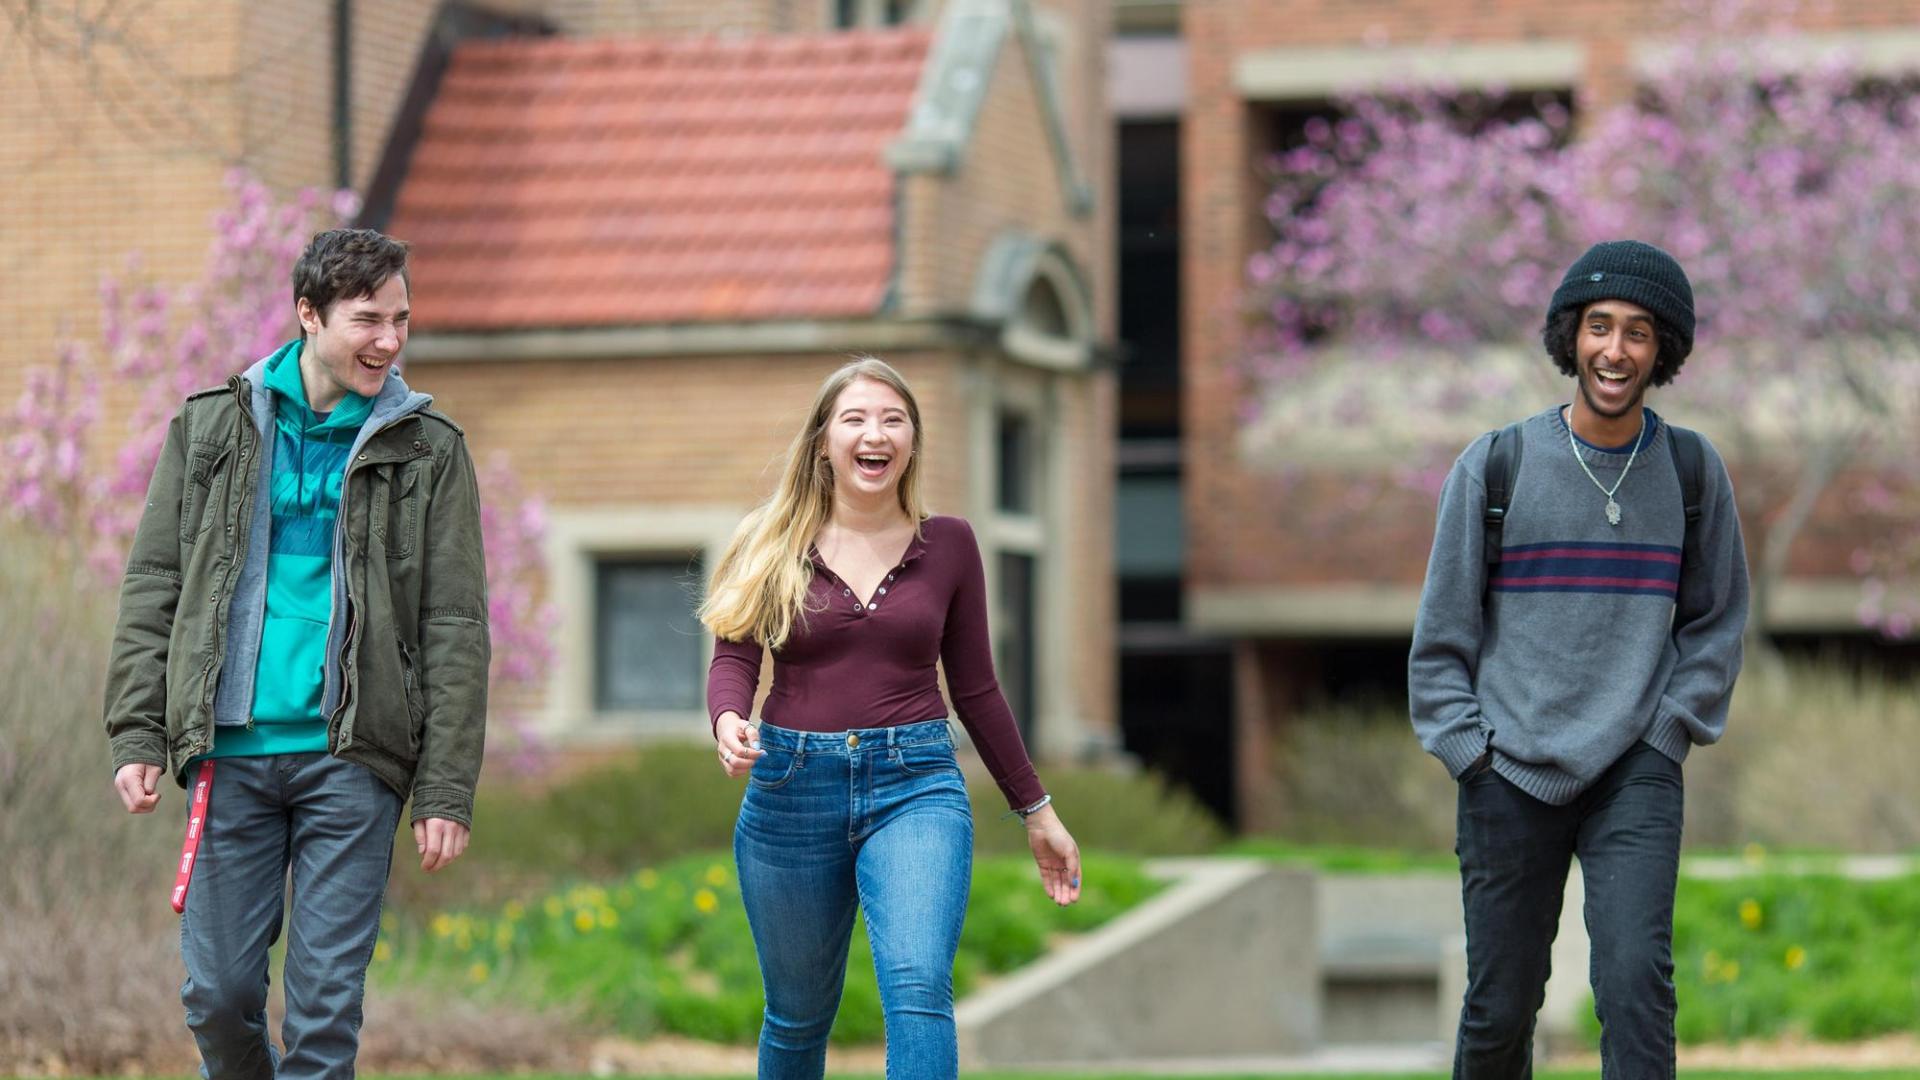 three students walking on Hamline University campus in spring, with flowering trees